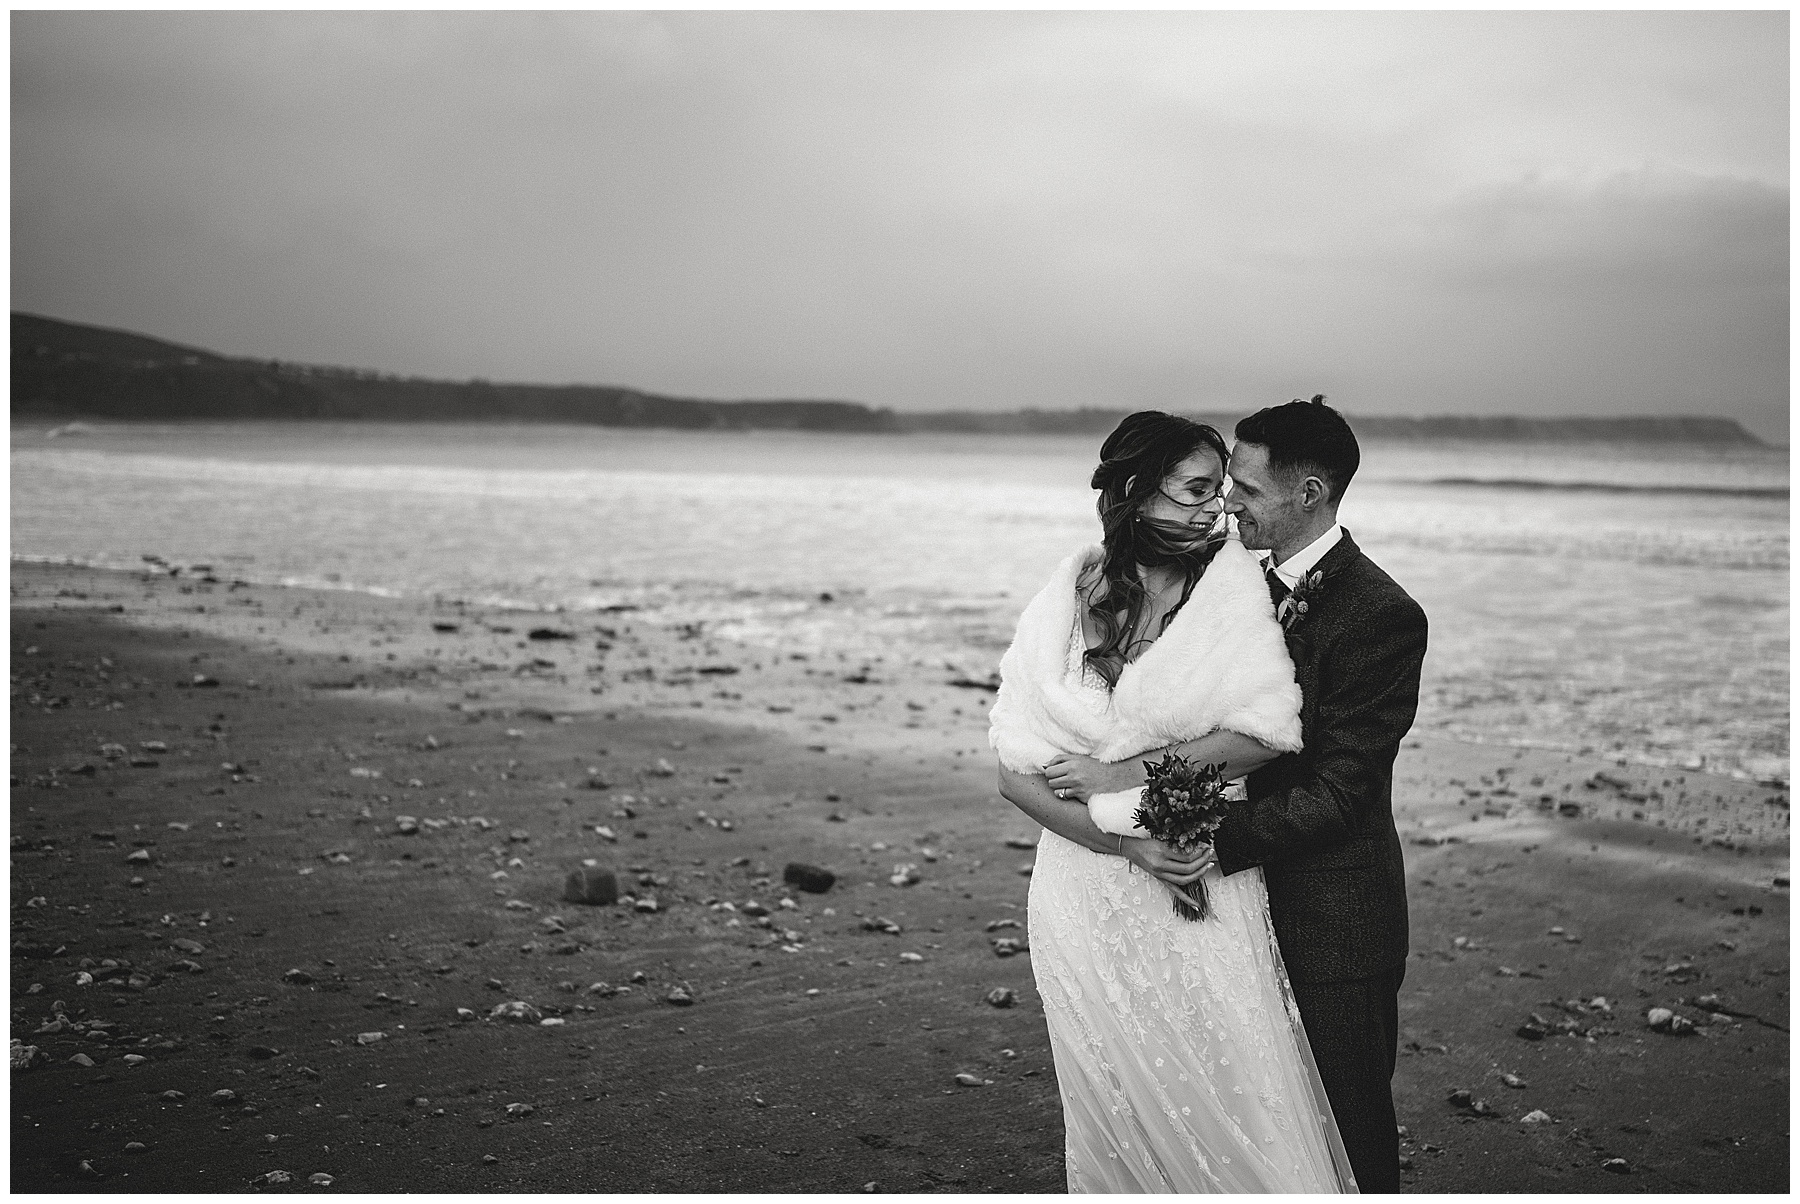 Wedding Sunset Photos at Oxwich Bay